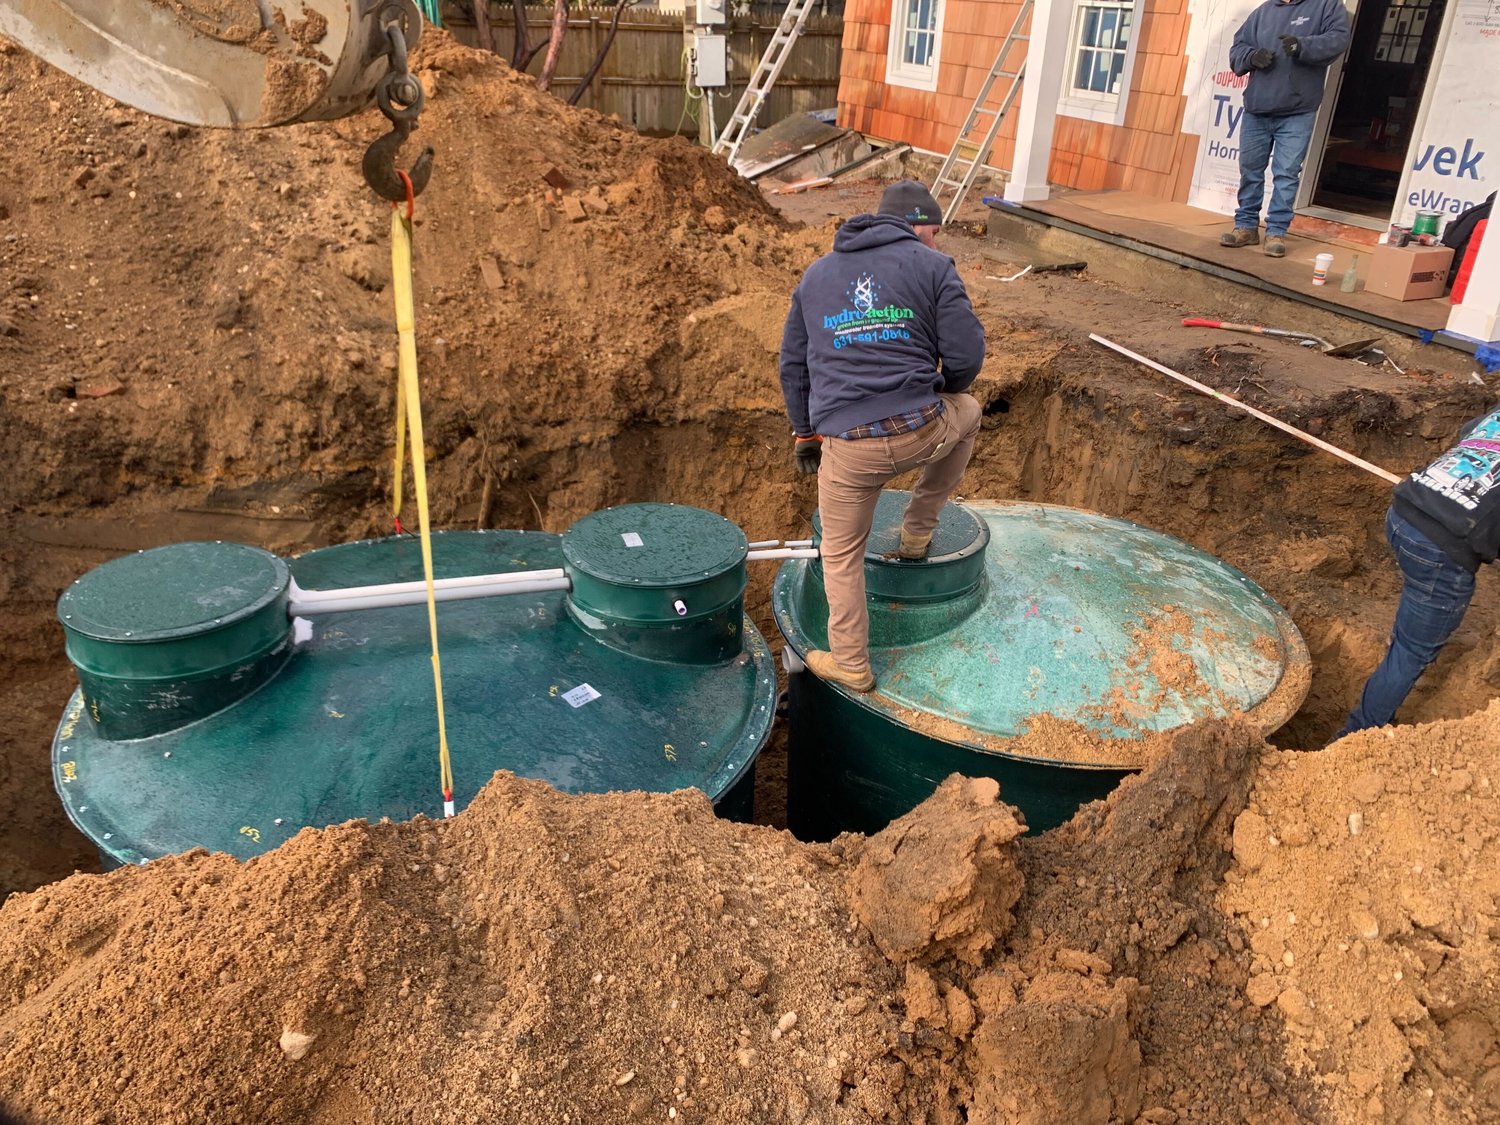 The Nassau County SEPTIC program has installed 50 Hydro-Action septic systems, and environmentalists hope to do many more in the coming months.